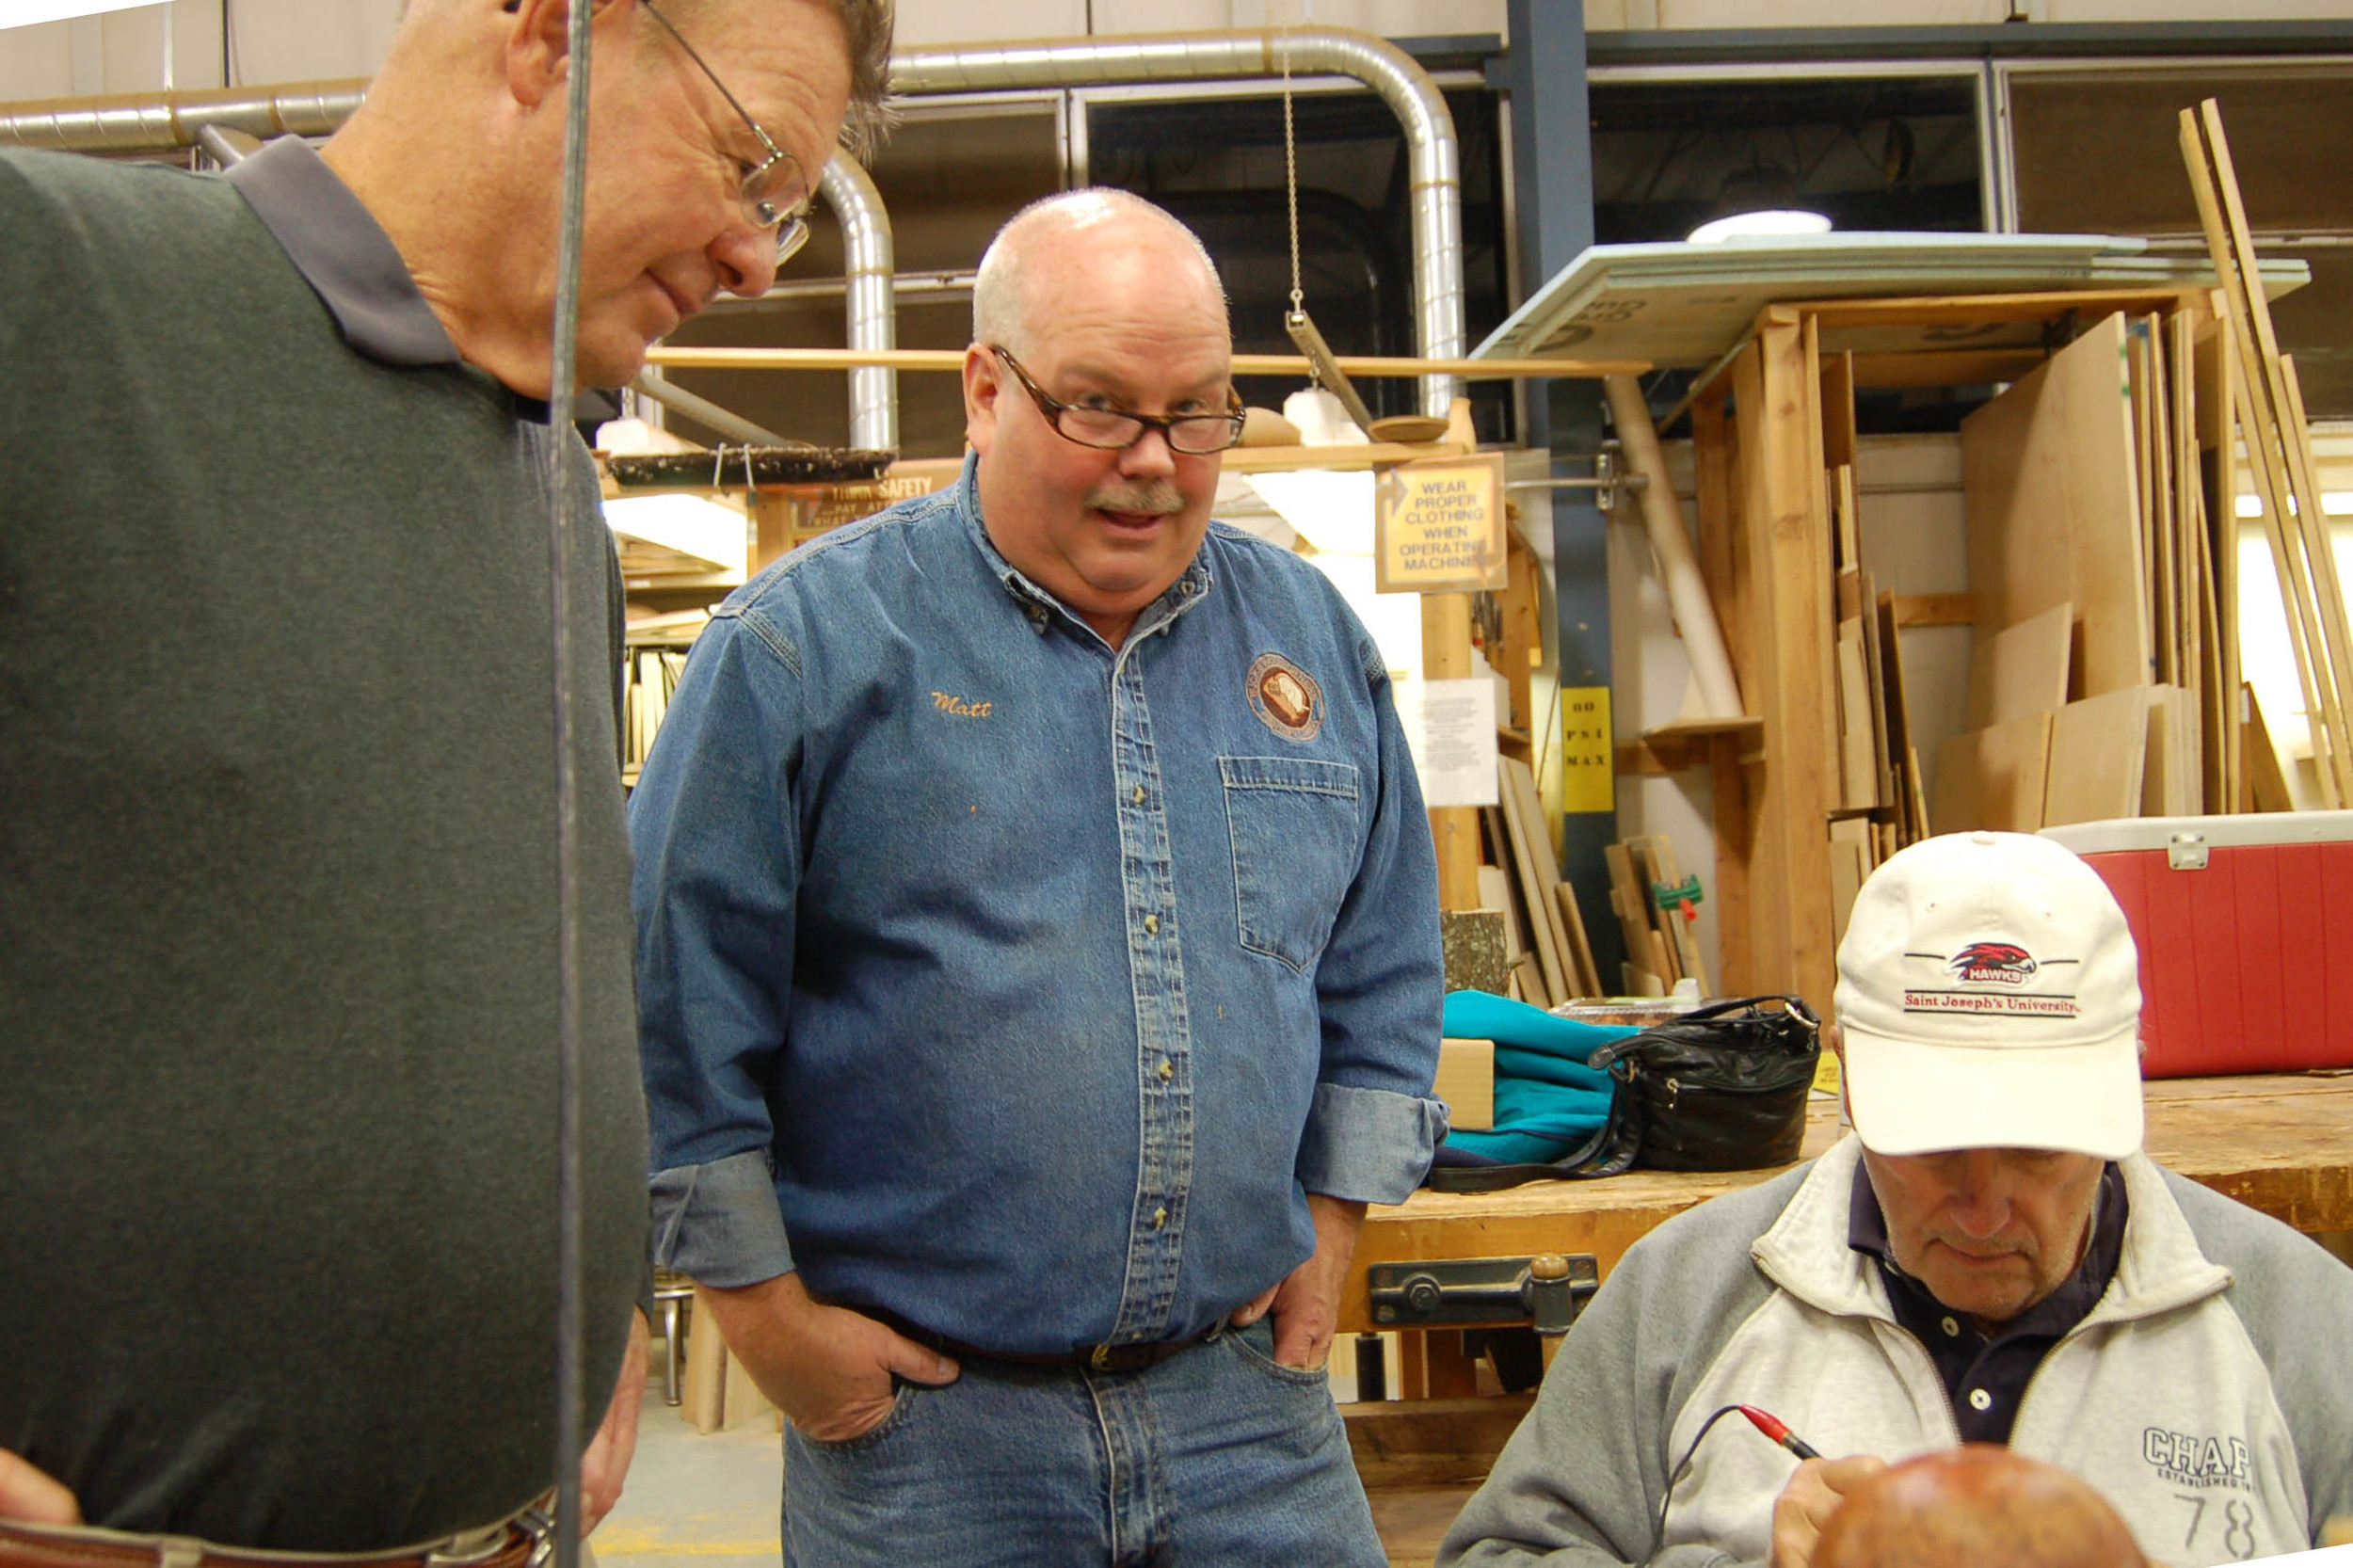  Keith Nelson and Matt Overton look on as John Williams demonstrates his signature pyrography. 